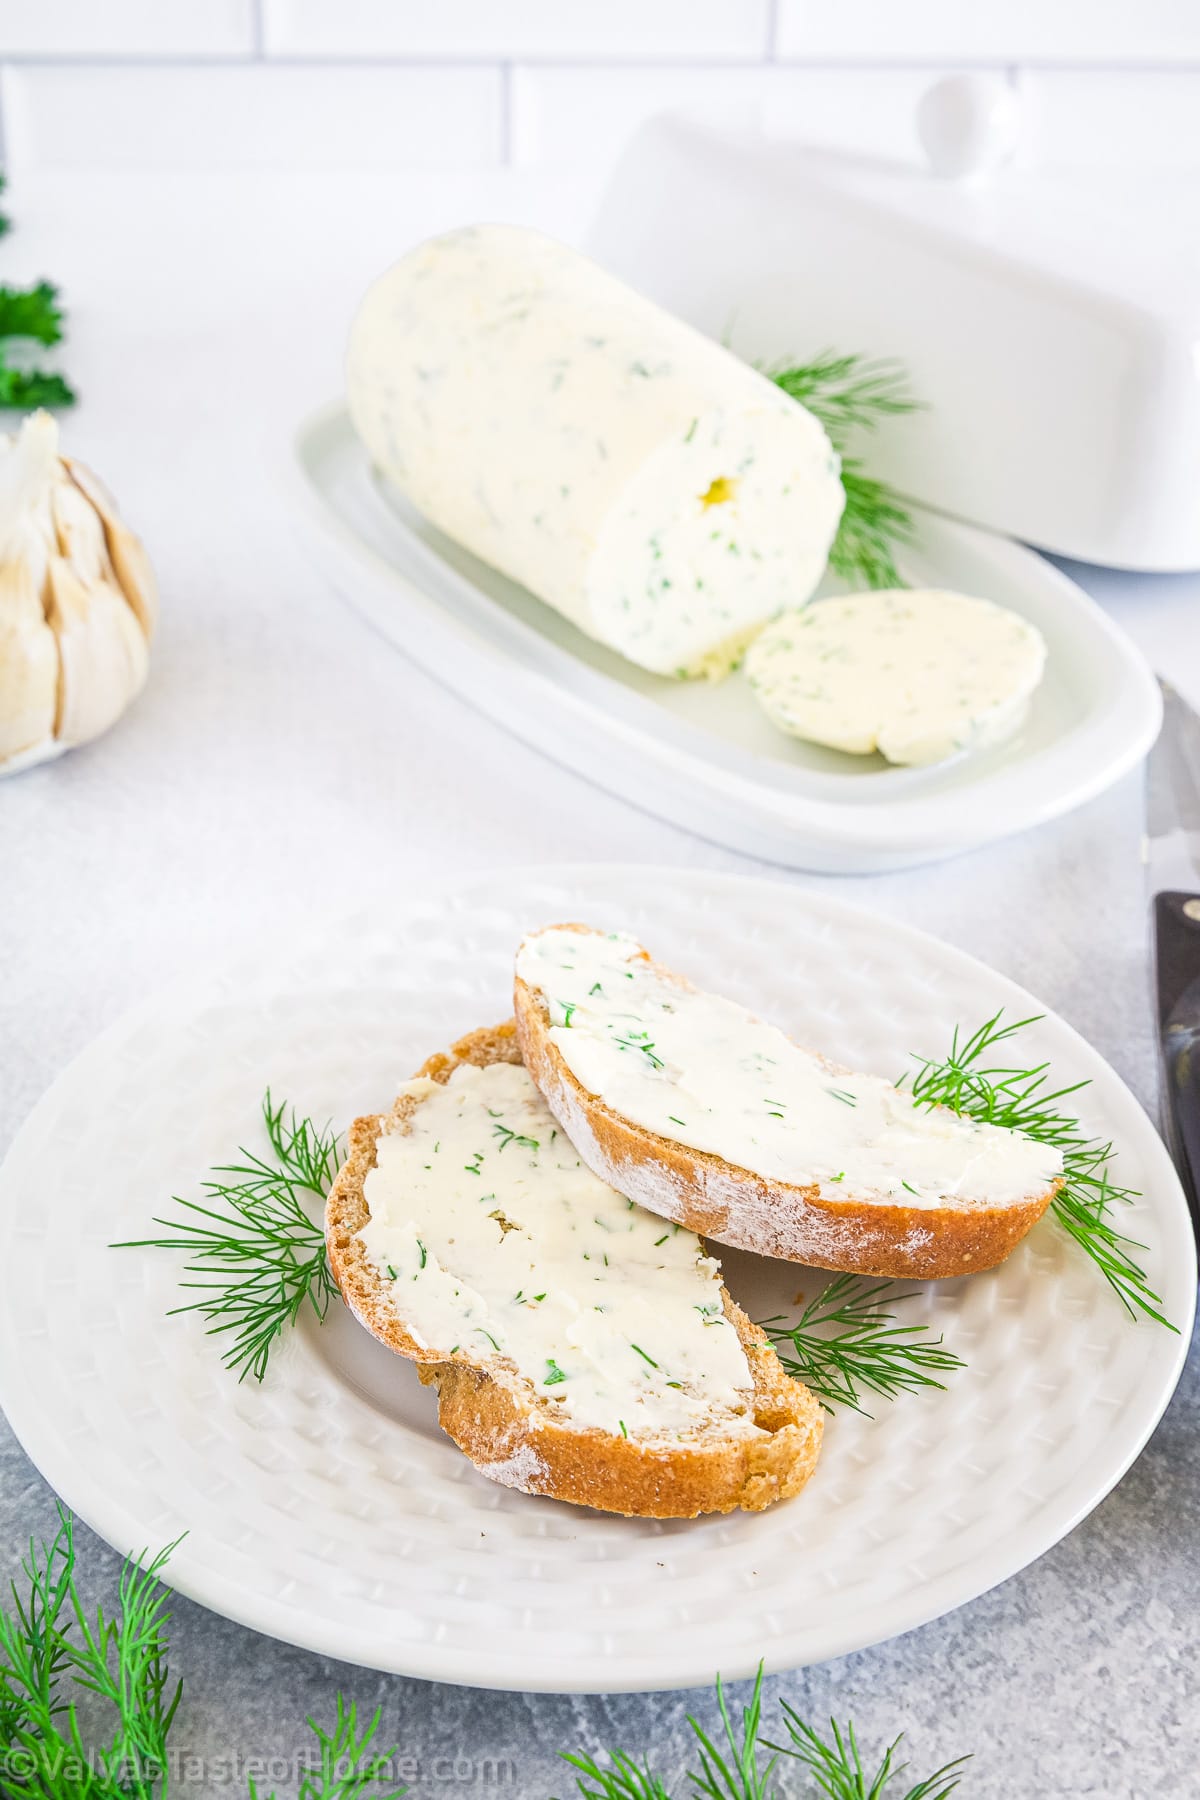 Garlic Butter is a simple yet delightful recipe that is sure to become a staple in your kitchen. It is a blend of softened butter, minced garlic, fresh parsley, and a dash of salt. 